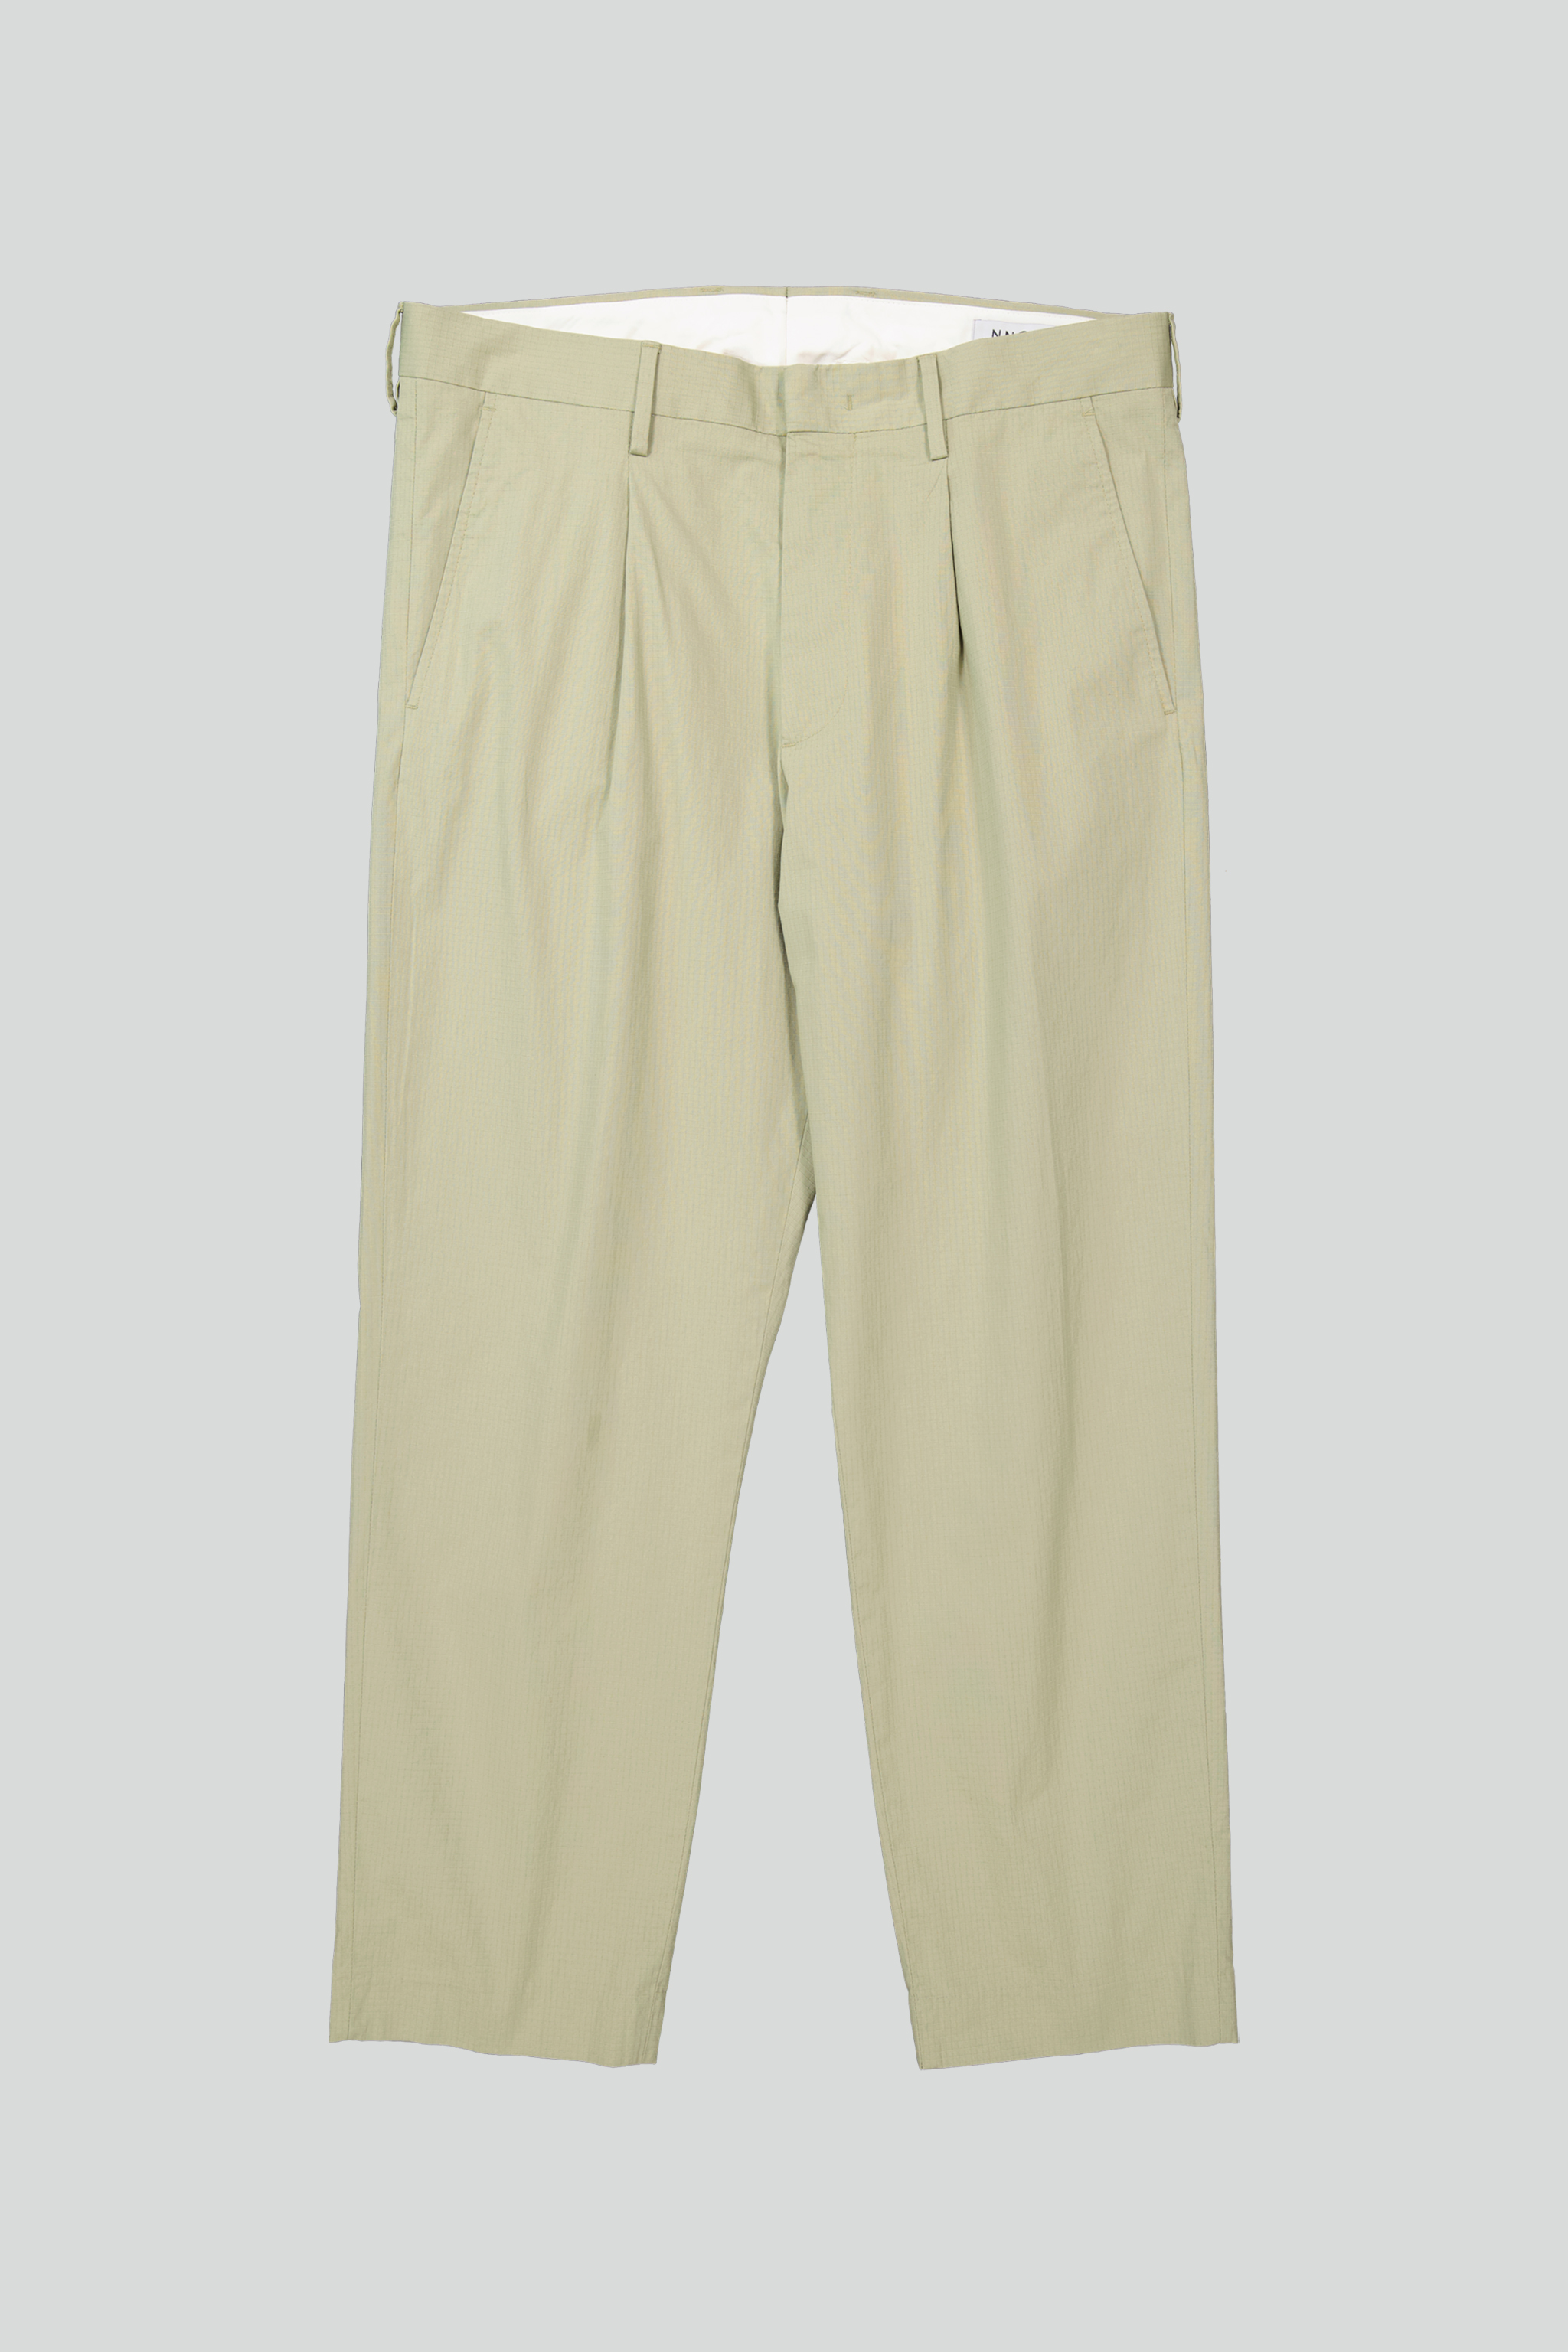 Good Neighbour  NO NATIONALITY 07 Bill 1449 Ripstop Trousers